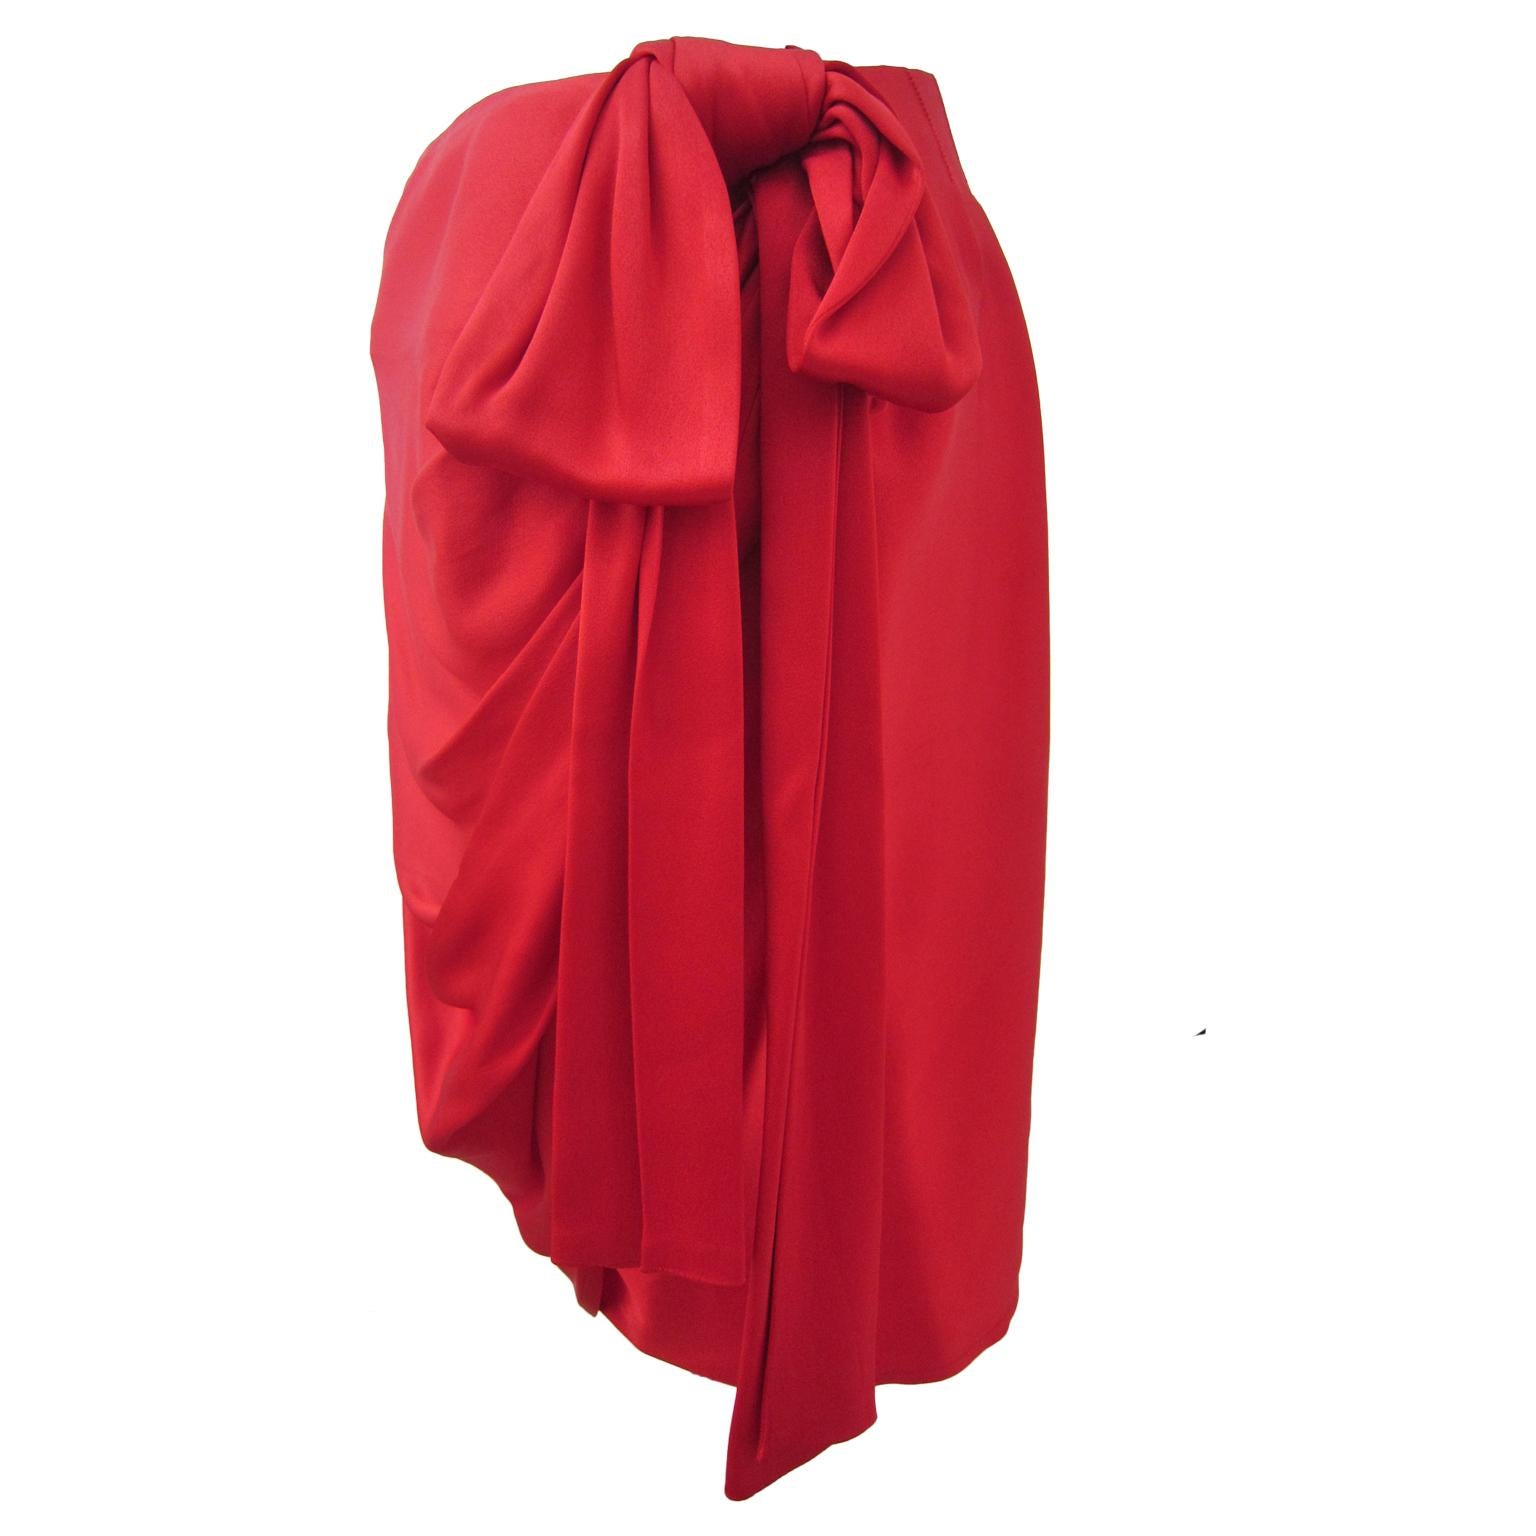 YSL Rive Gauche incredible red skirt from circa 1985.
The draped skirt fastens wrap style across the front with oversized bow. A push button and hooks closure. 
Original size : 40 FR, Fits a US 6 
